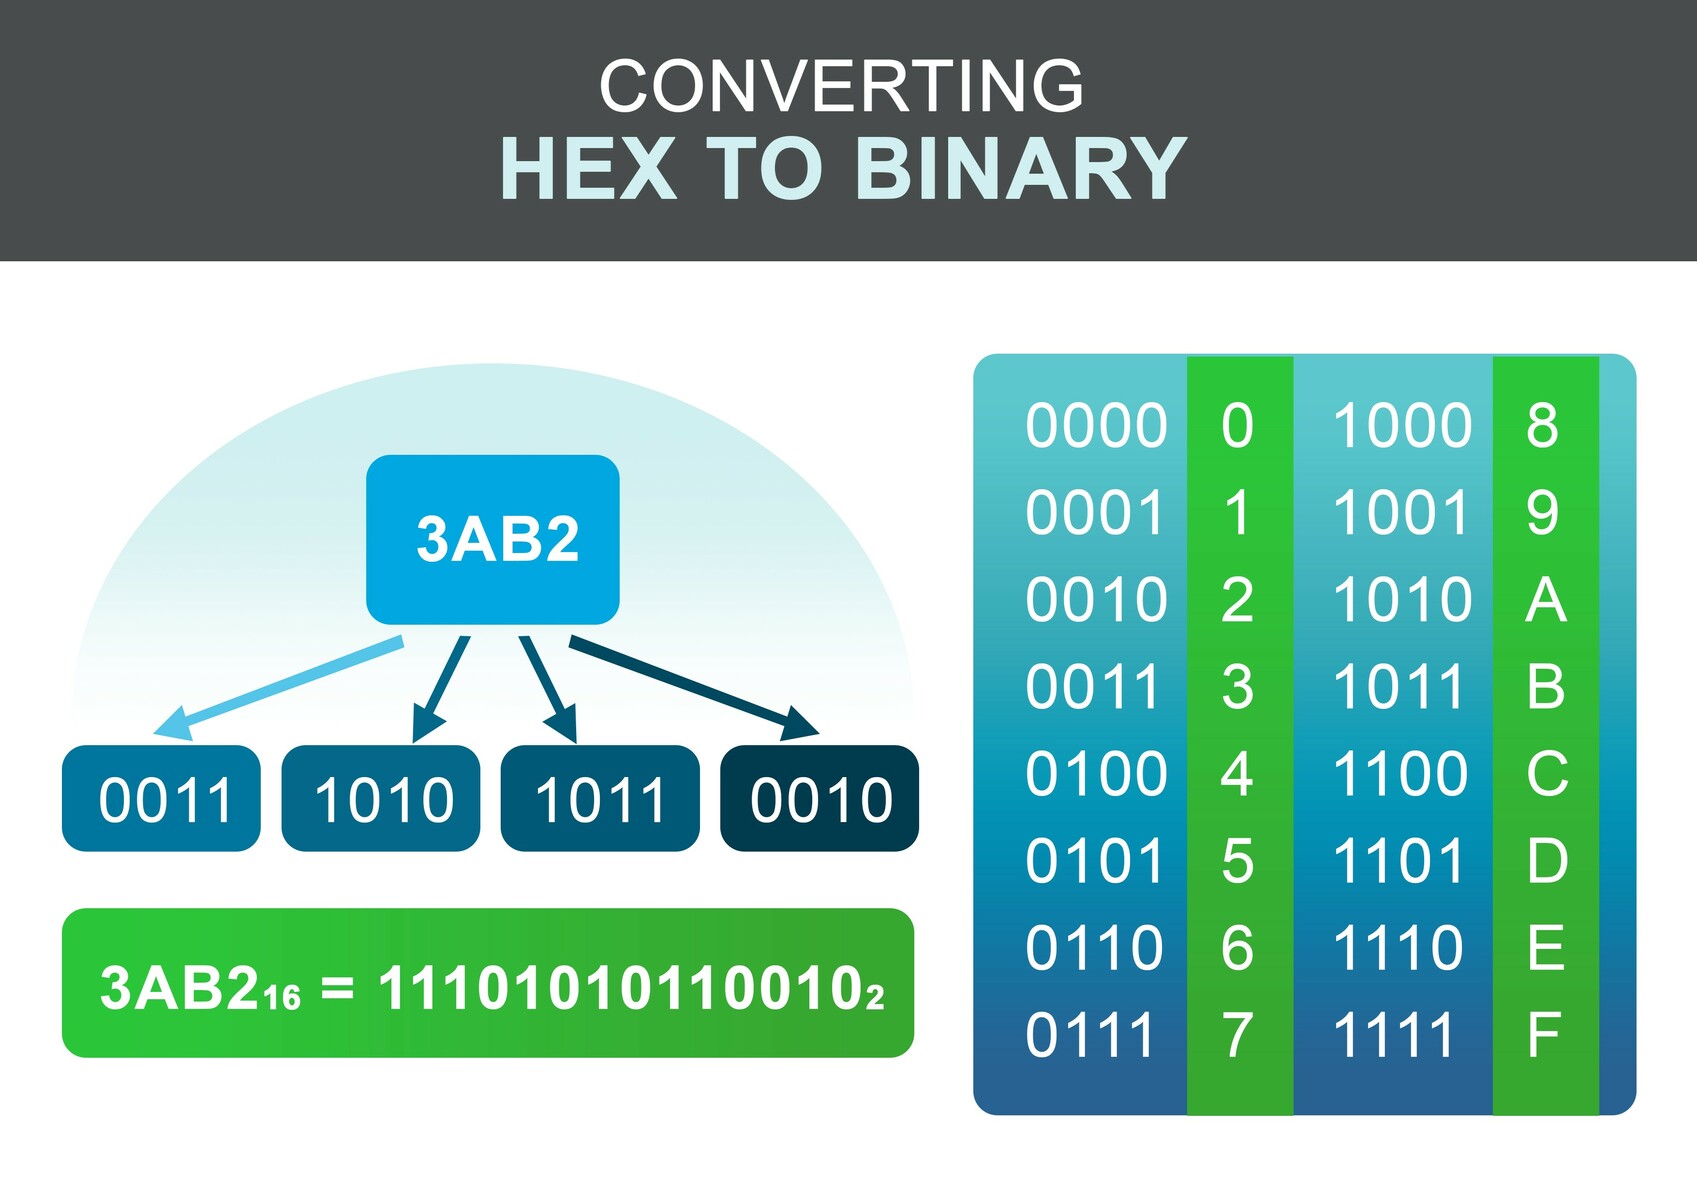 How to convert hex to binary